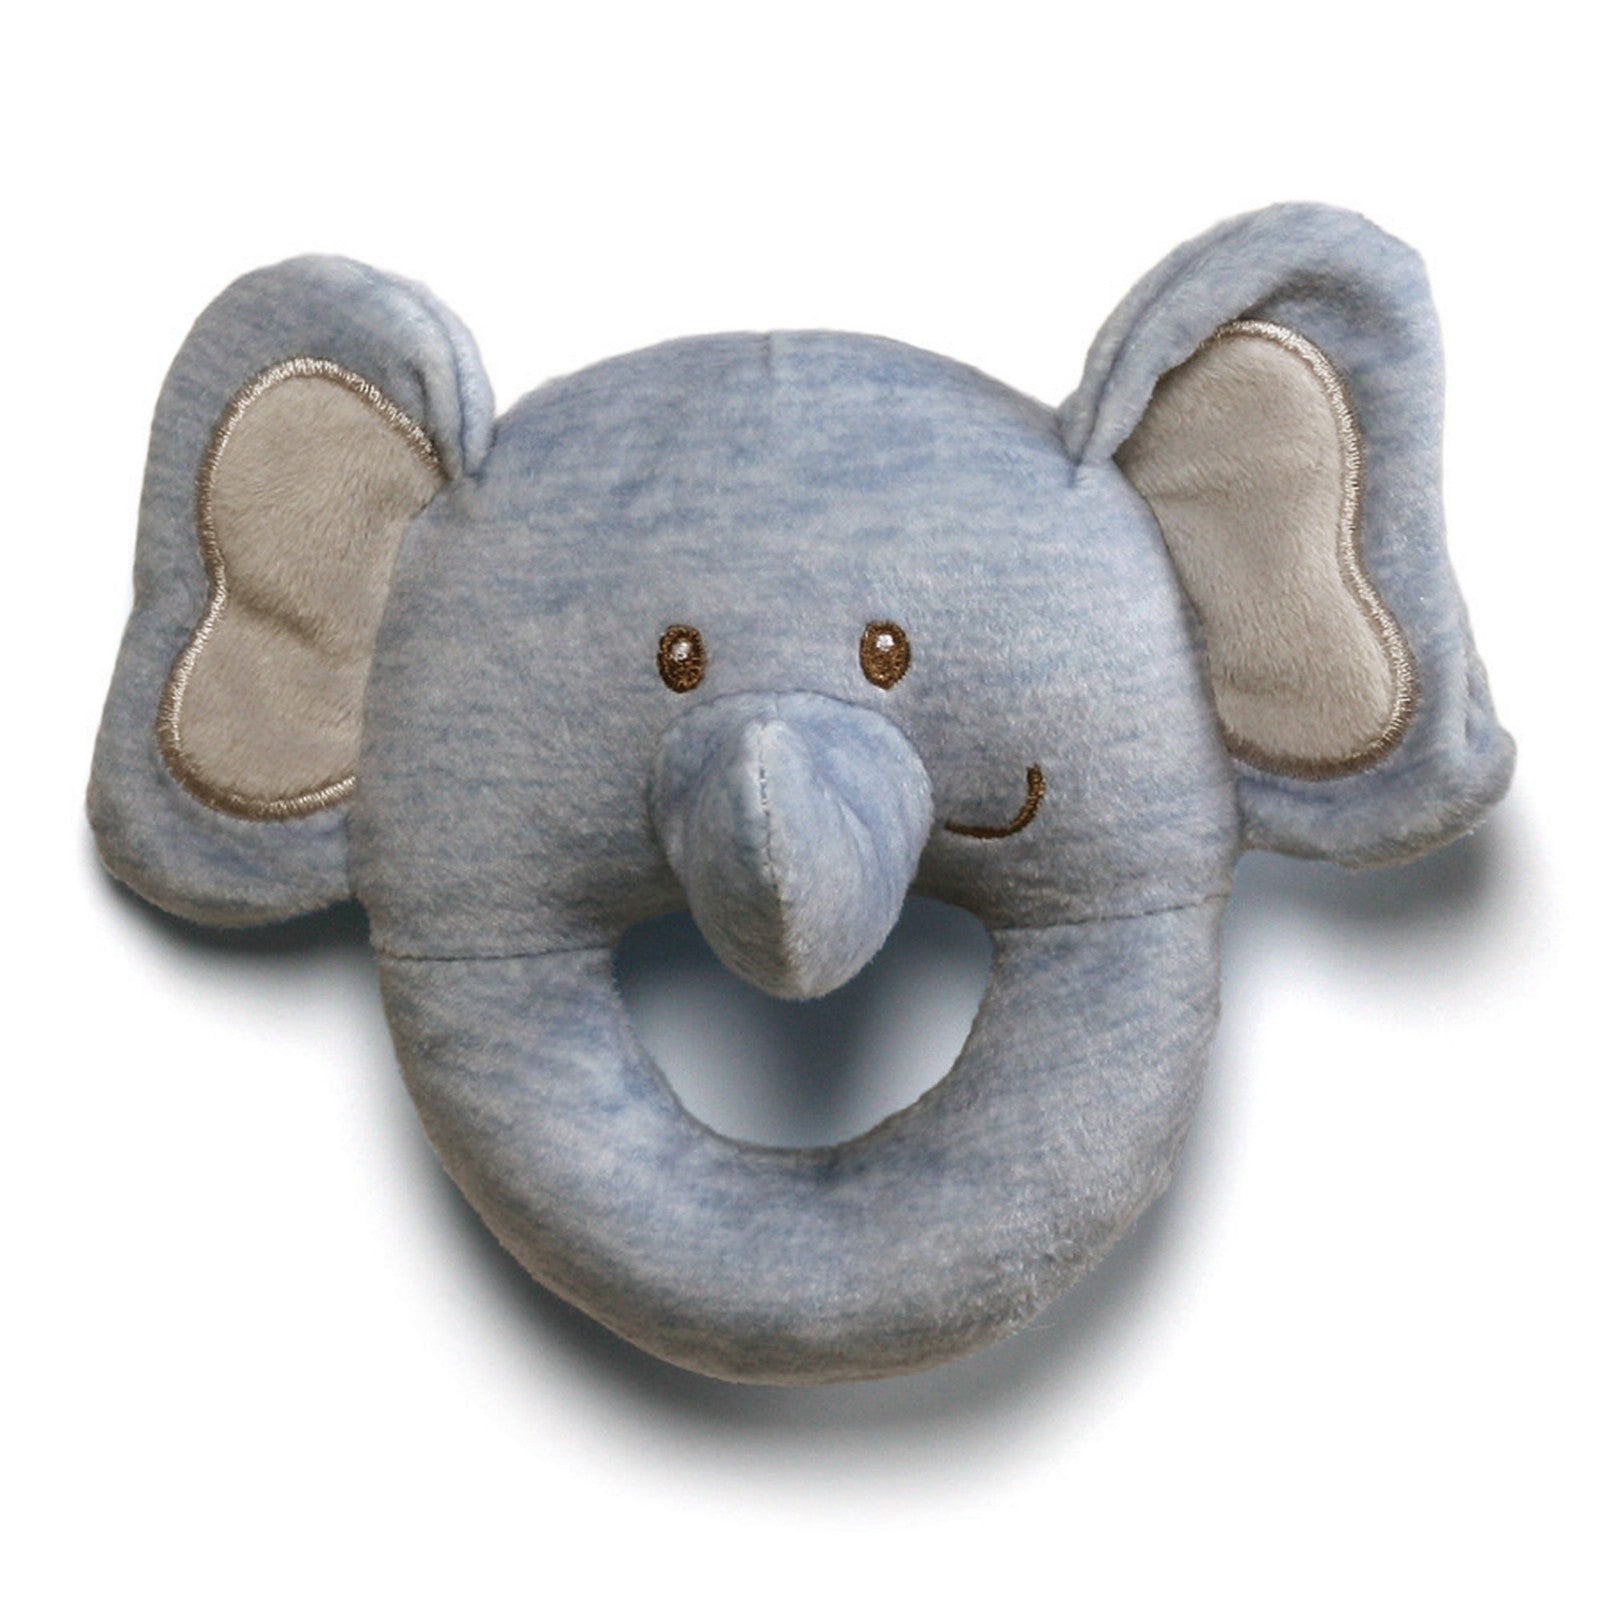 Baby Gund - Playful Pals Collection - Elephant Rattle